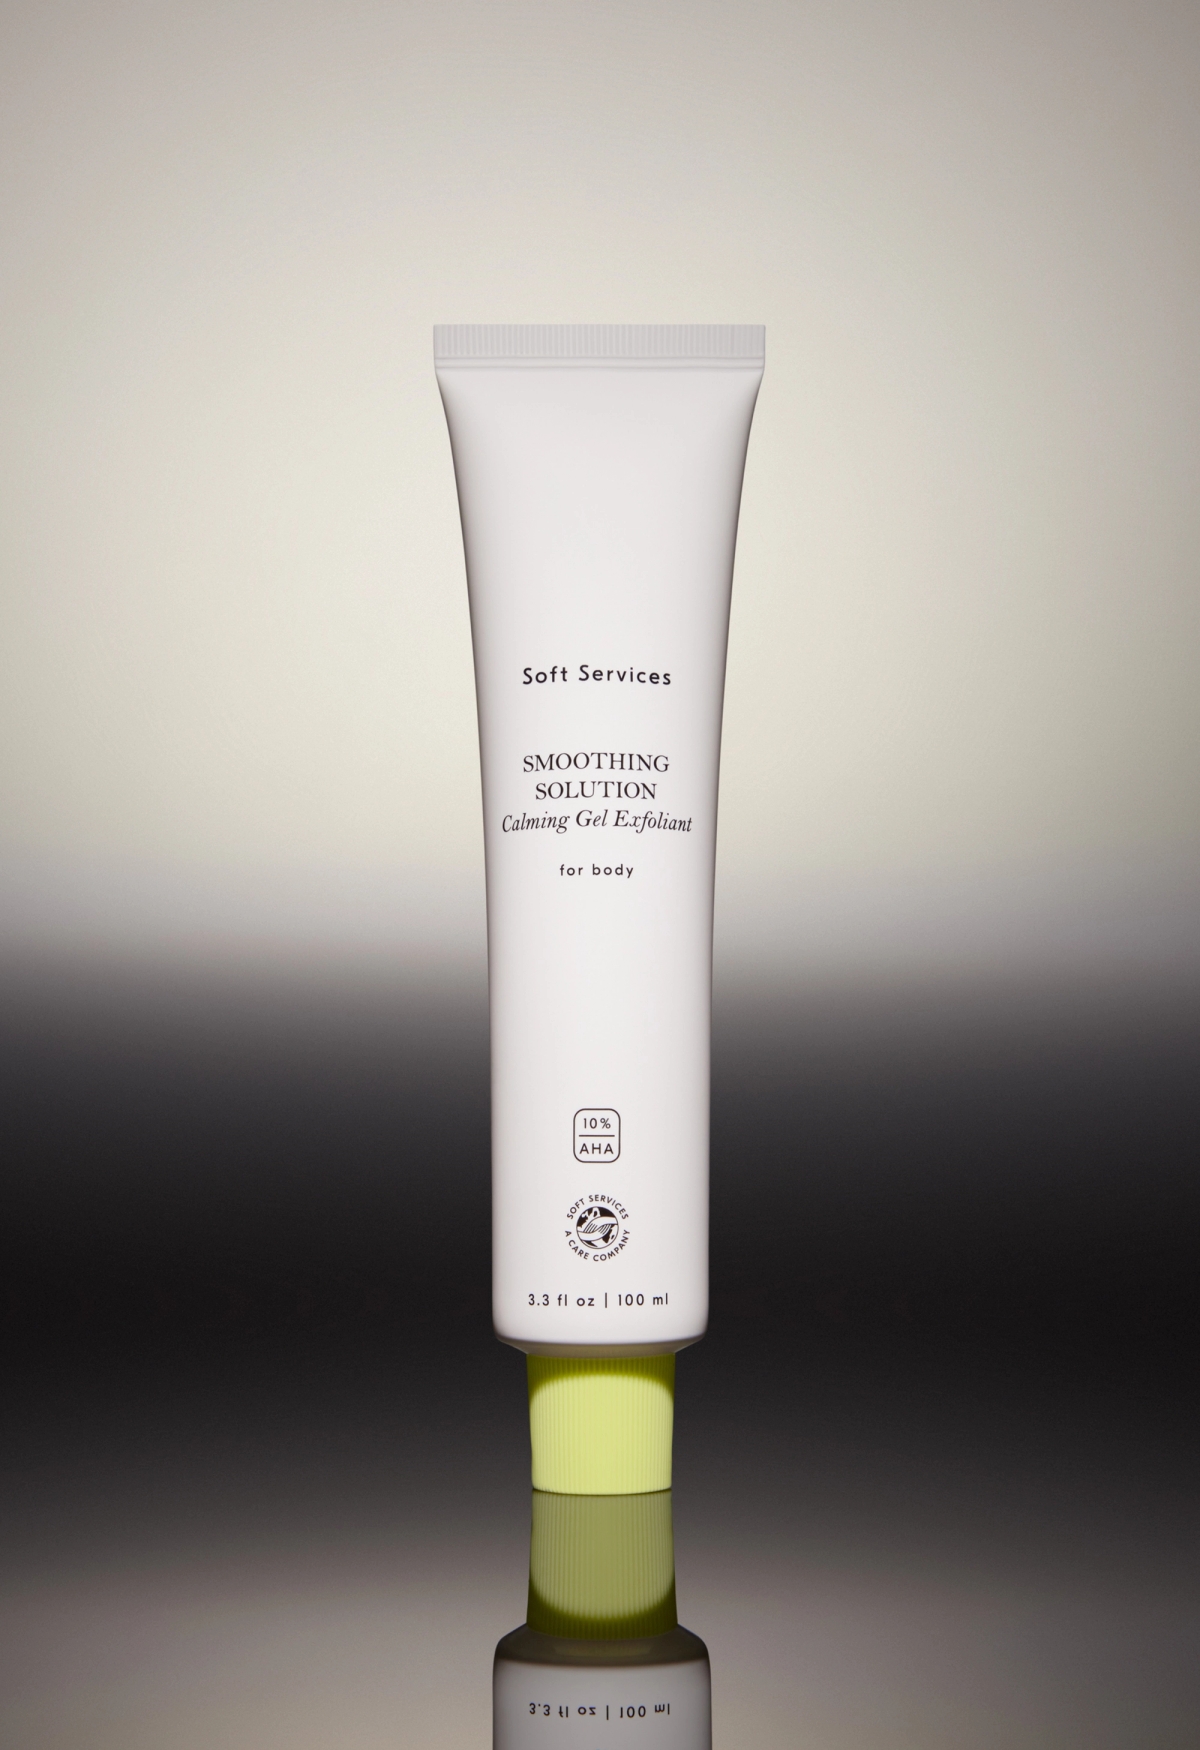 Smoothing Solution, Calming Gel Exfoliant for Body, Soft Services